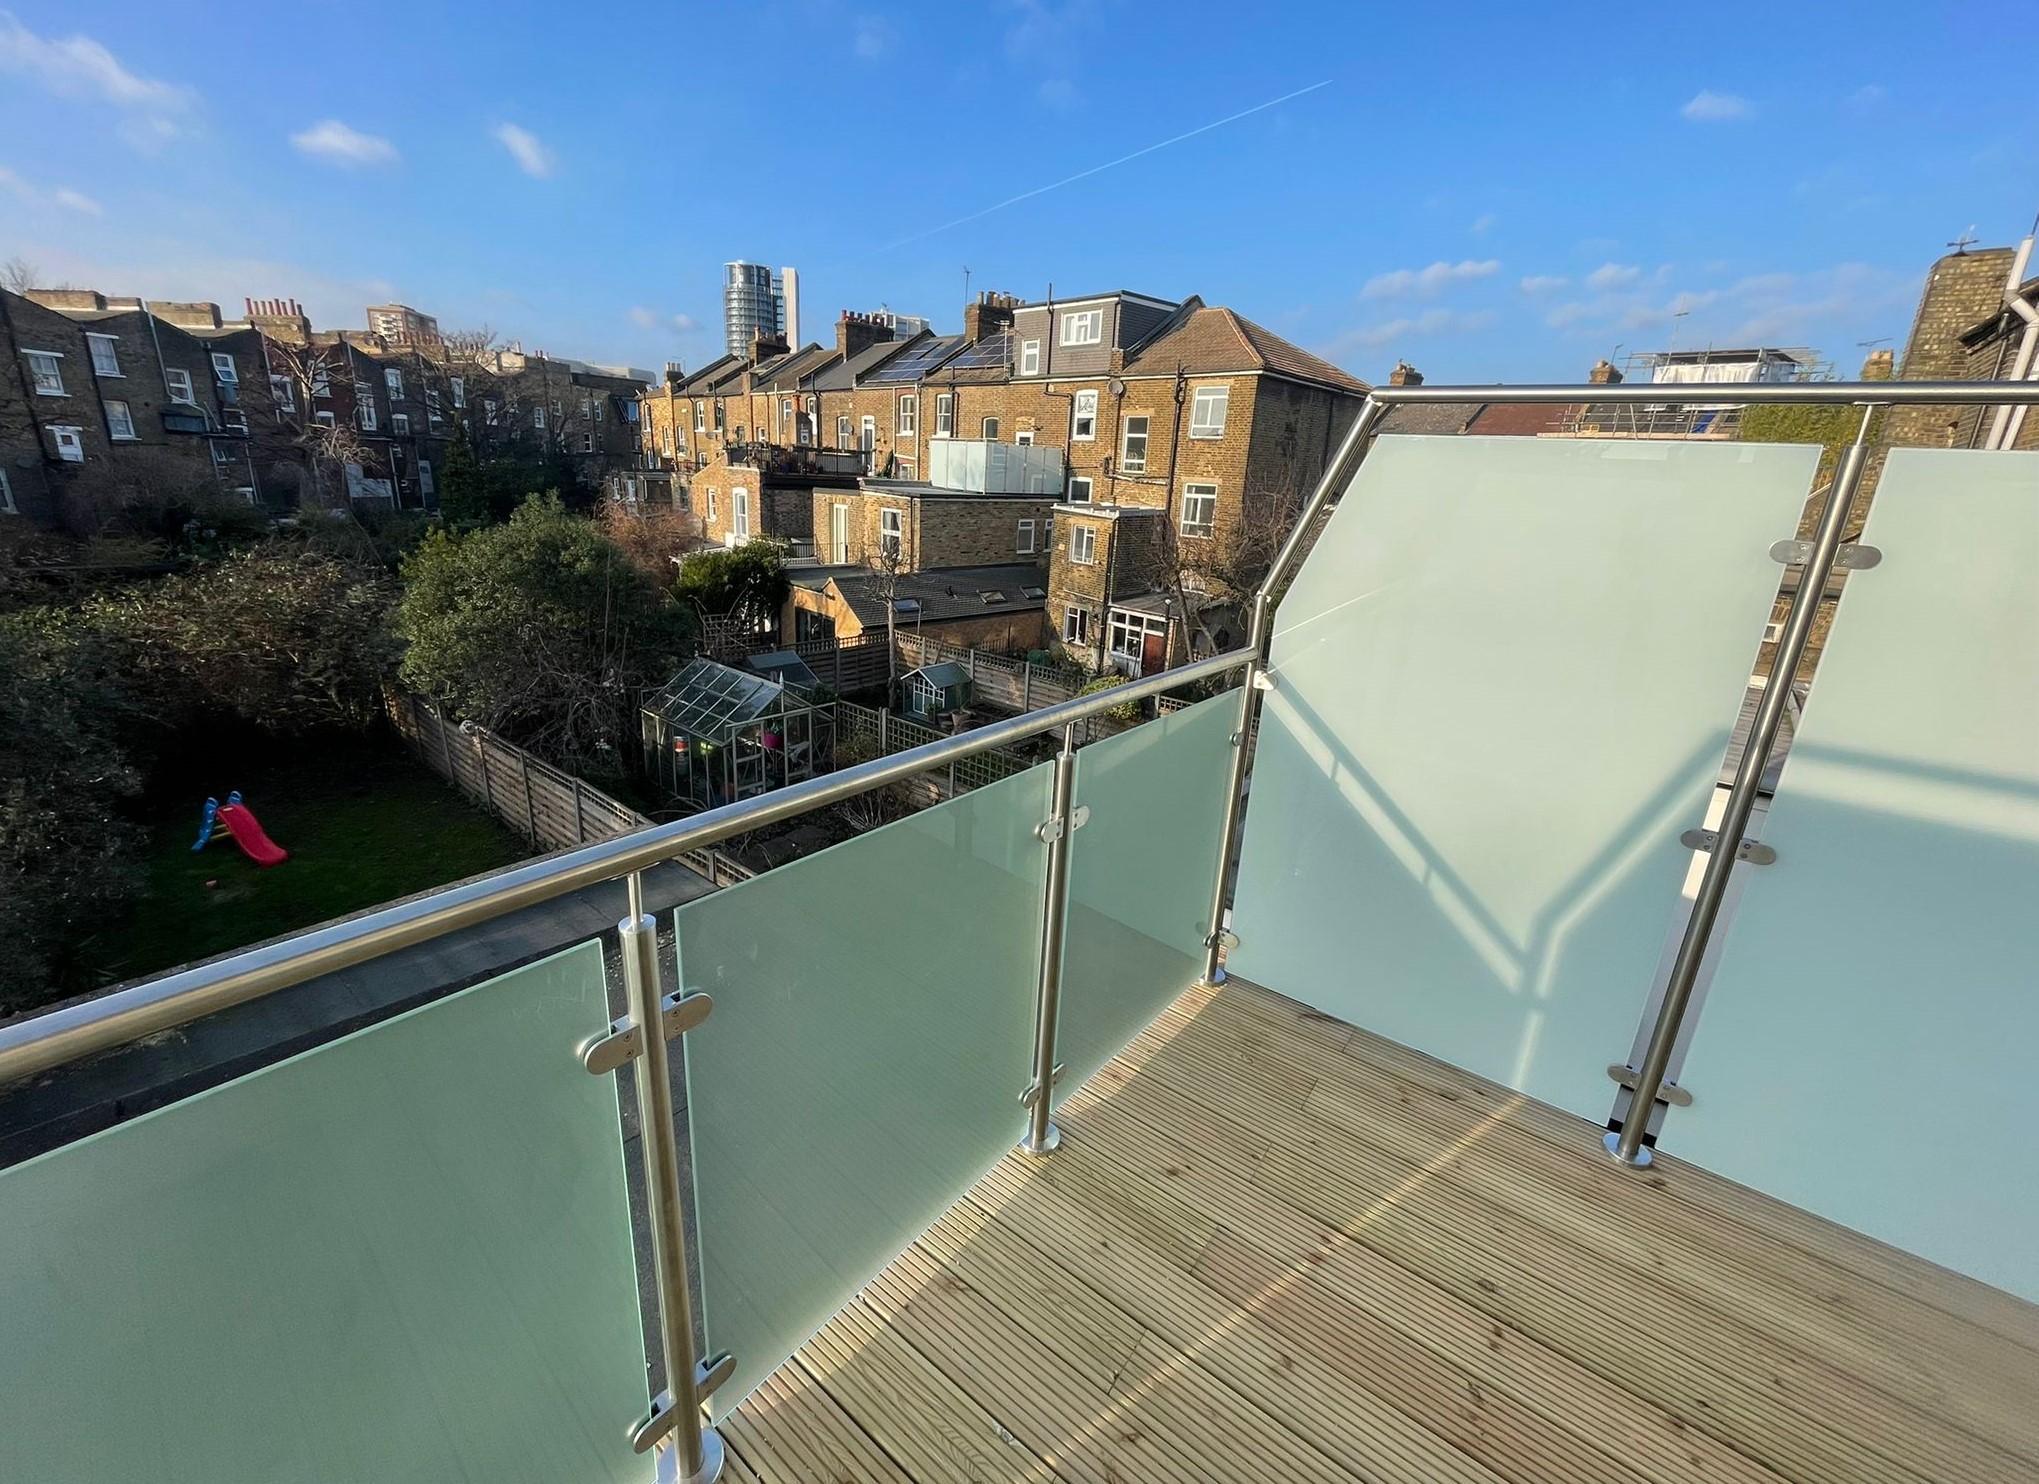 Main image for Sussex Balustrade Solutions